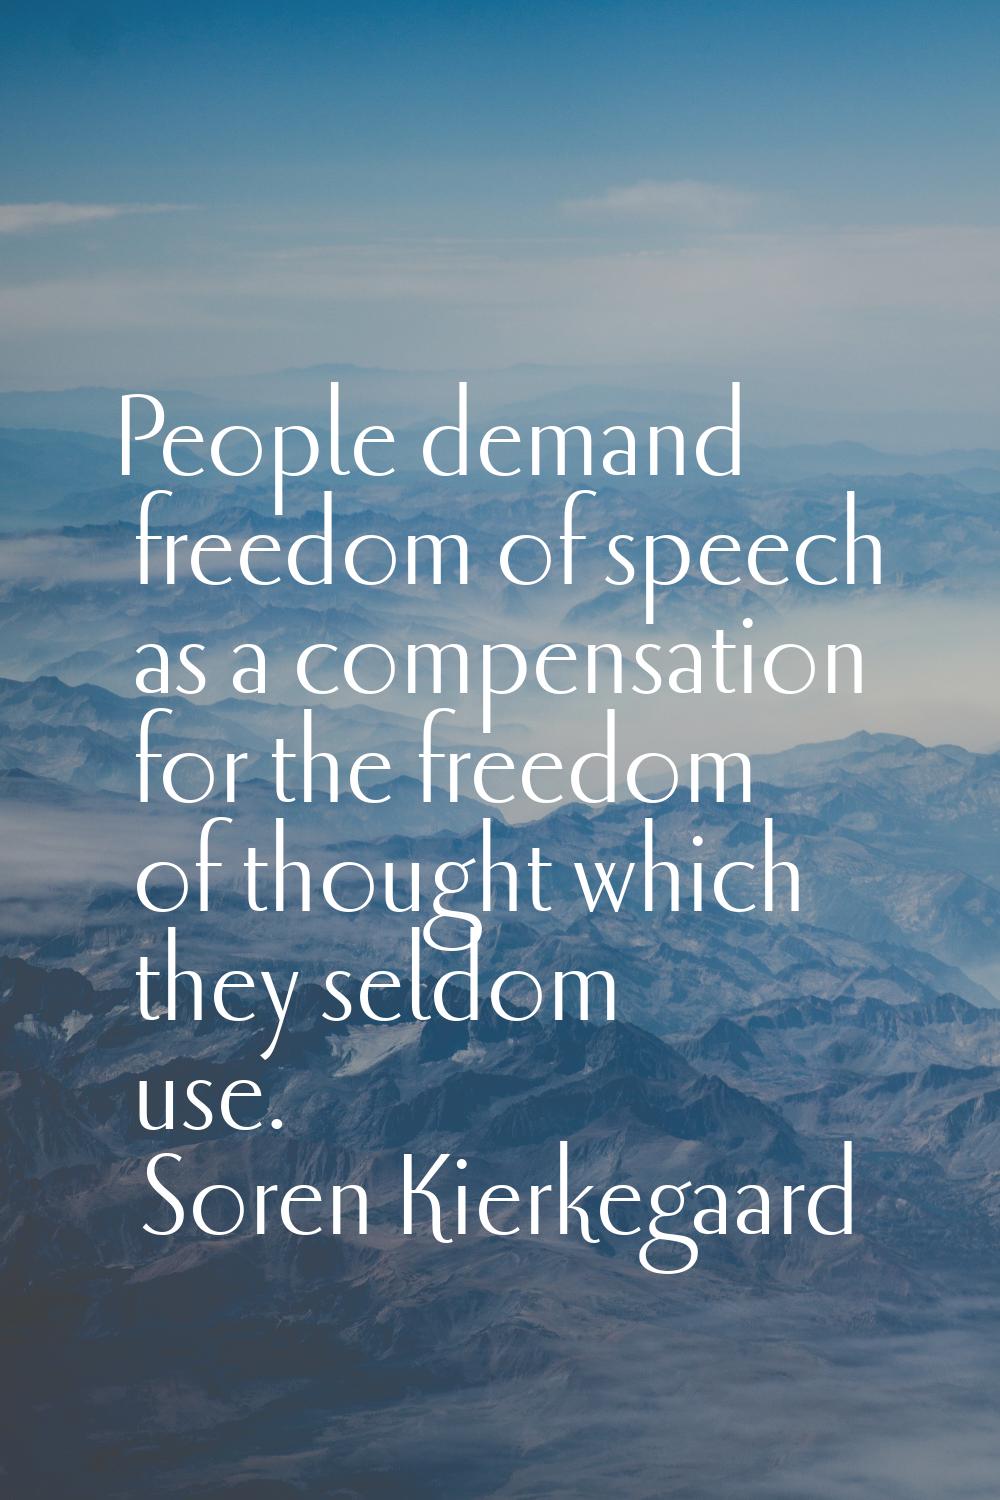 People demand freedom of speech as a compensation for the freedom of thought which they seldom use.